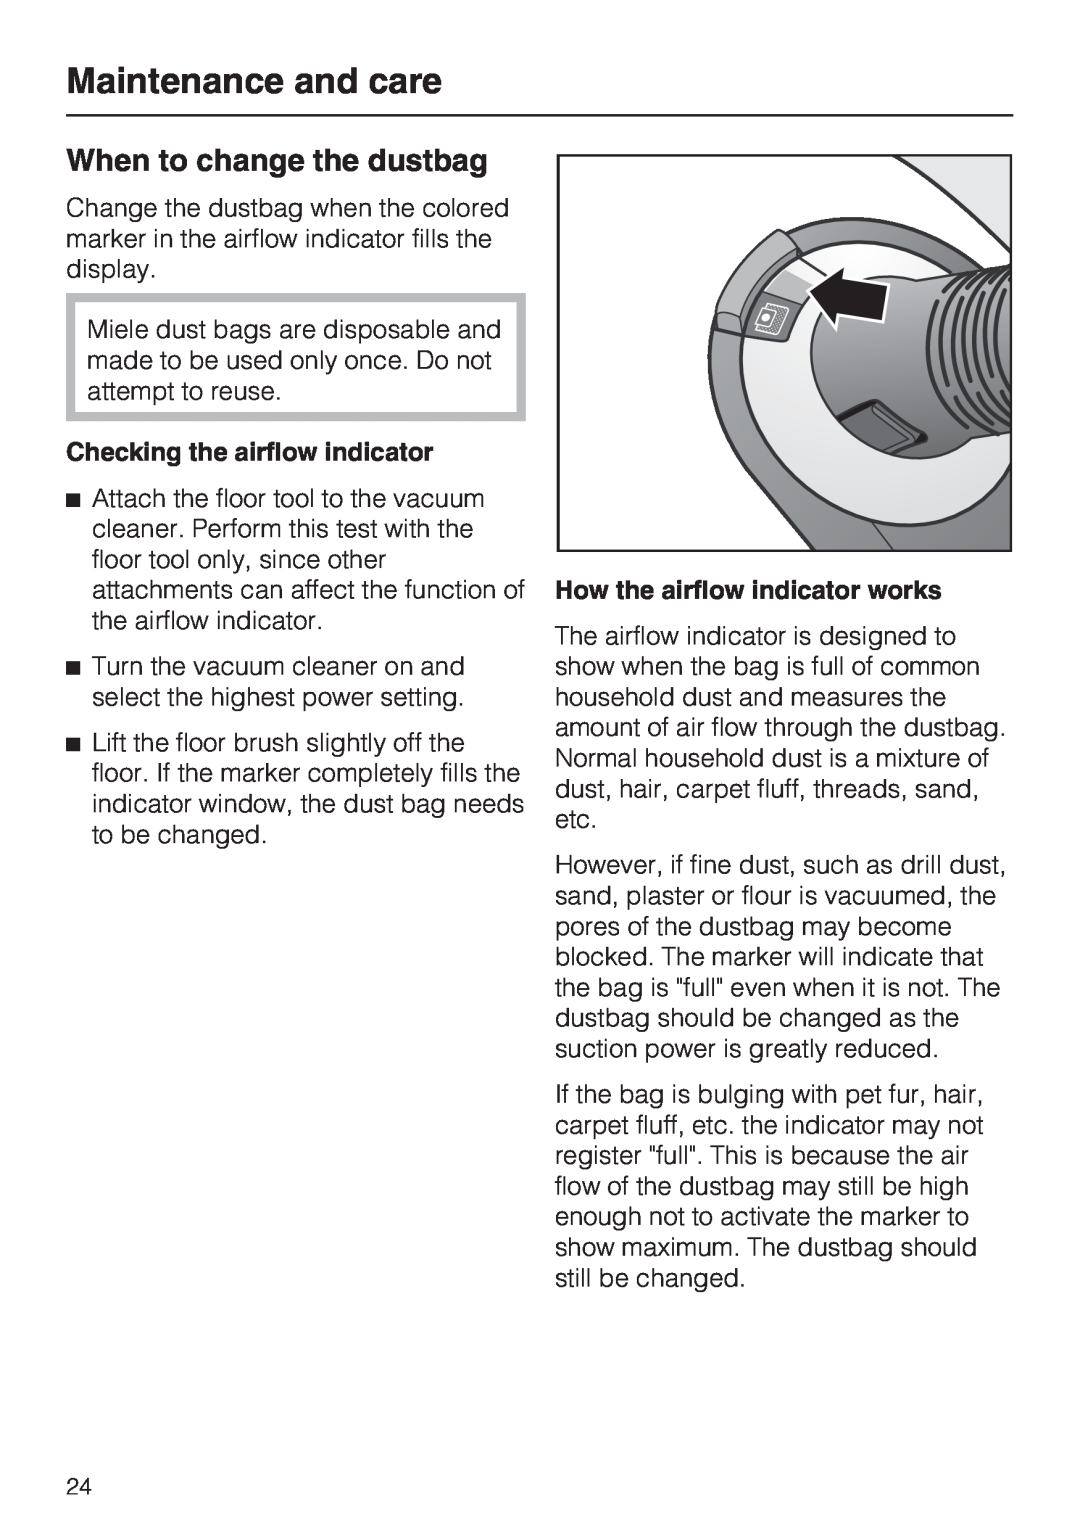 Miele S 5980 operating instructions When to change the dustbag, Maintenance and care, Checking the airflow indicator 